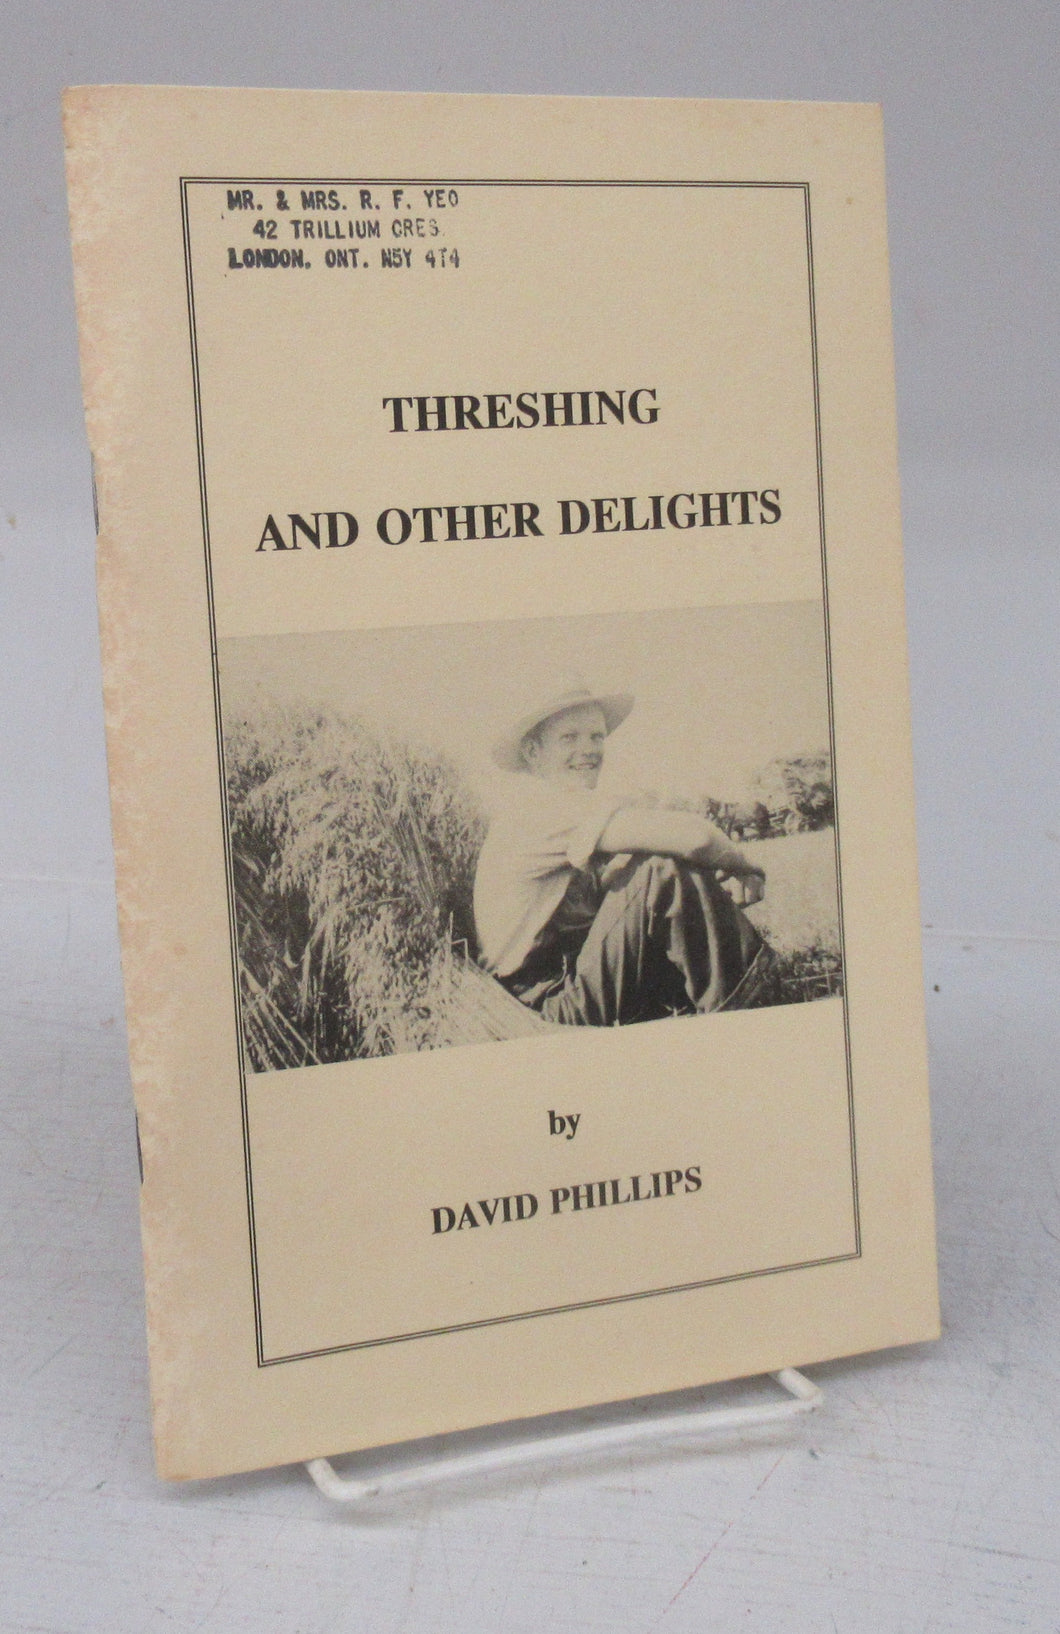 Threshing and Other Delights